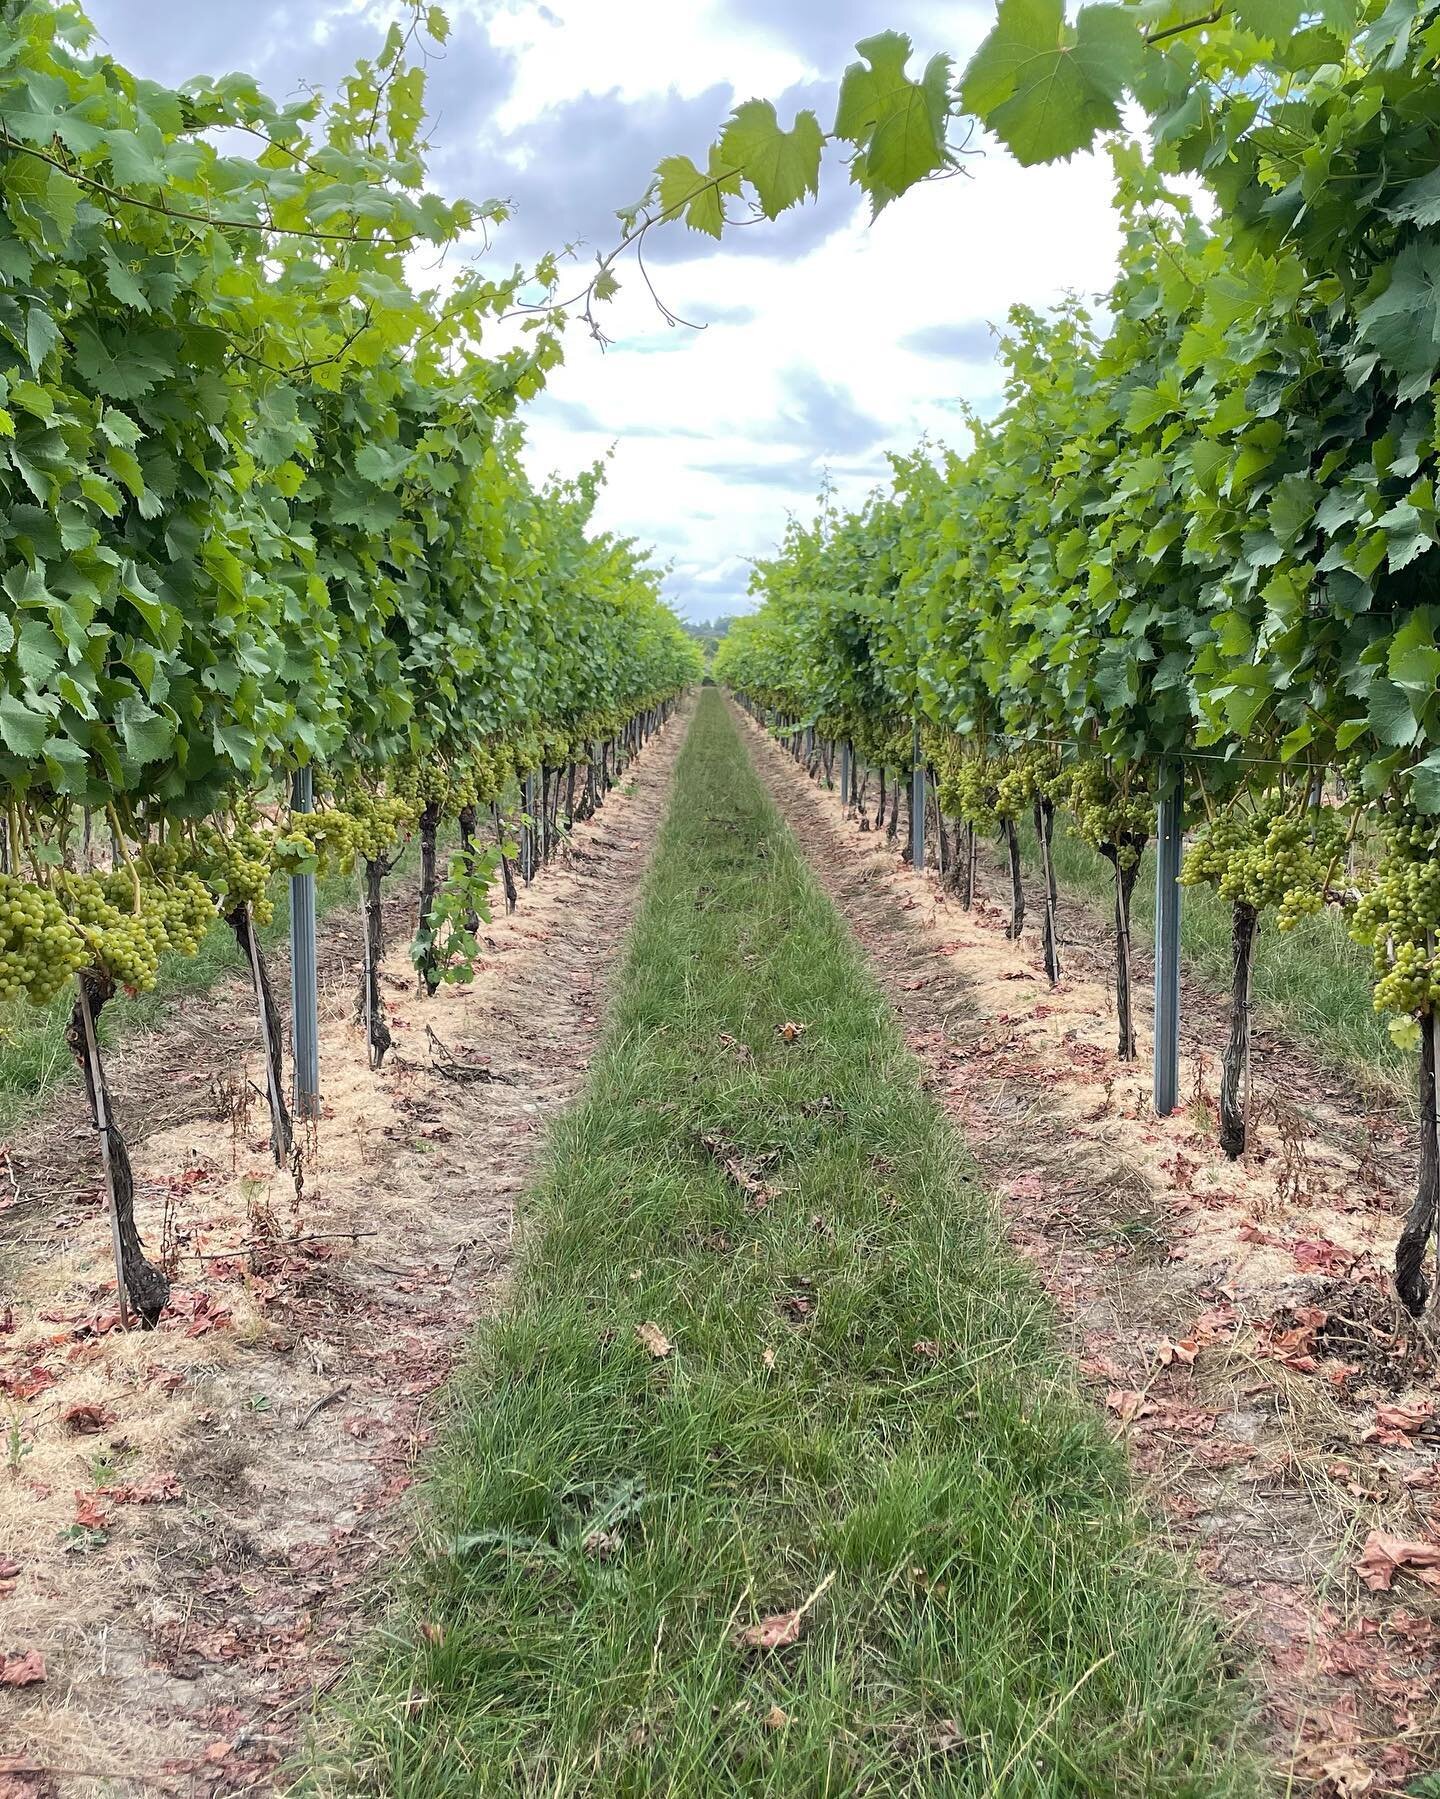 Checking out the crop! In Oxfordshire today looking at vines, chatting to one of the super growers we work with. 

Very exciting to see that harvest is on its way. Not long now&hellip;👌❤️💥🍇